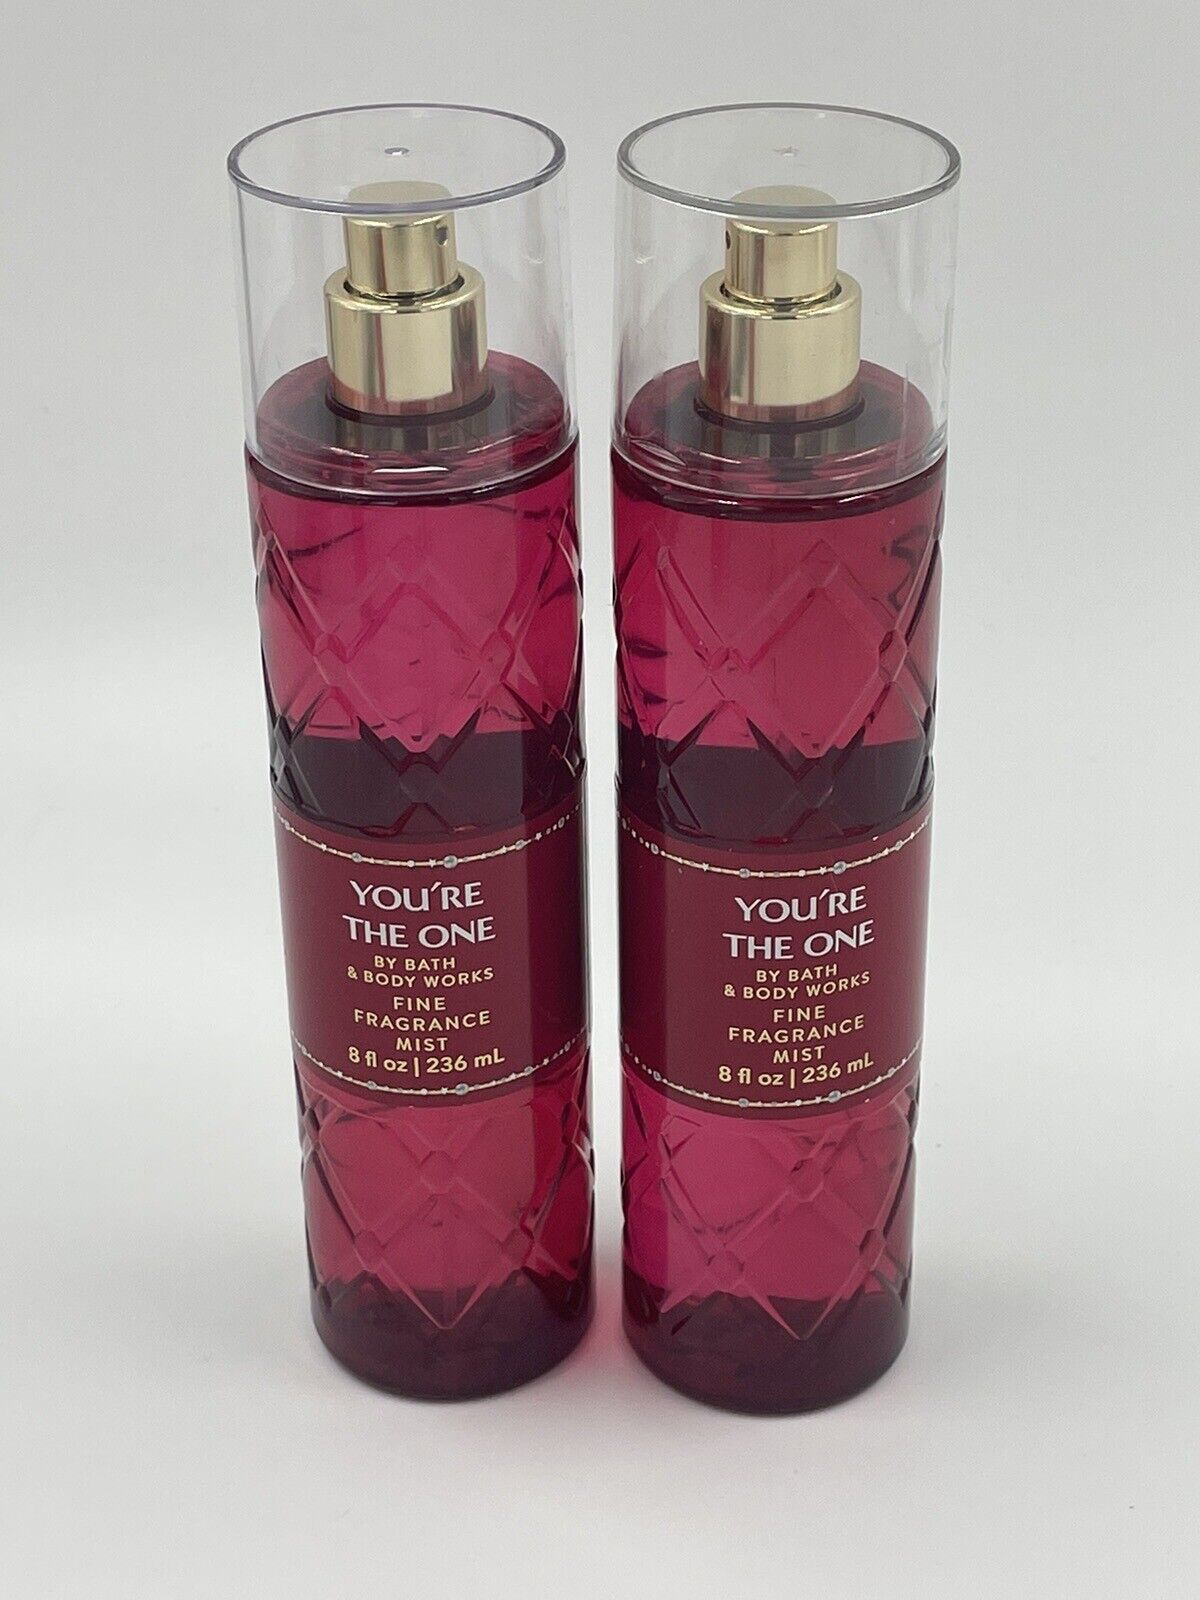 YOU'RE THE ONE Bath and Body Works Fine Fragrance Body Mist 8 Oz Lot of 2